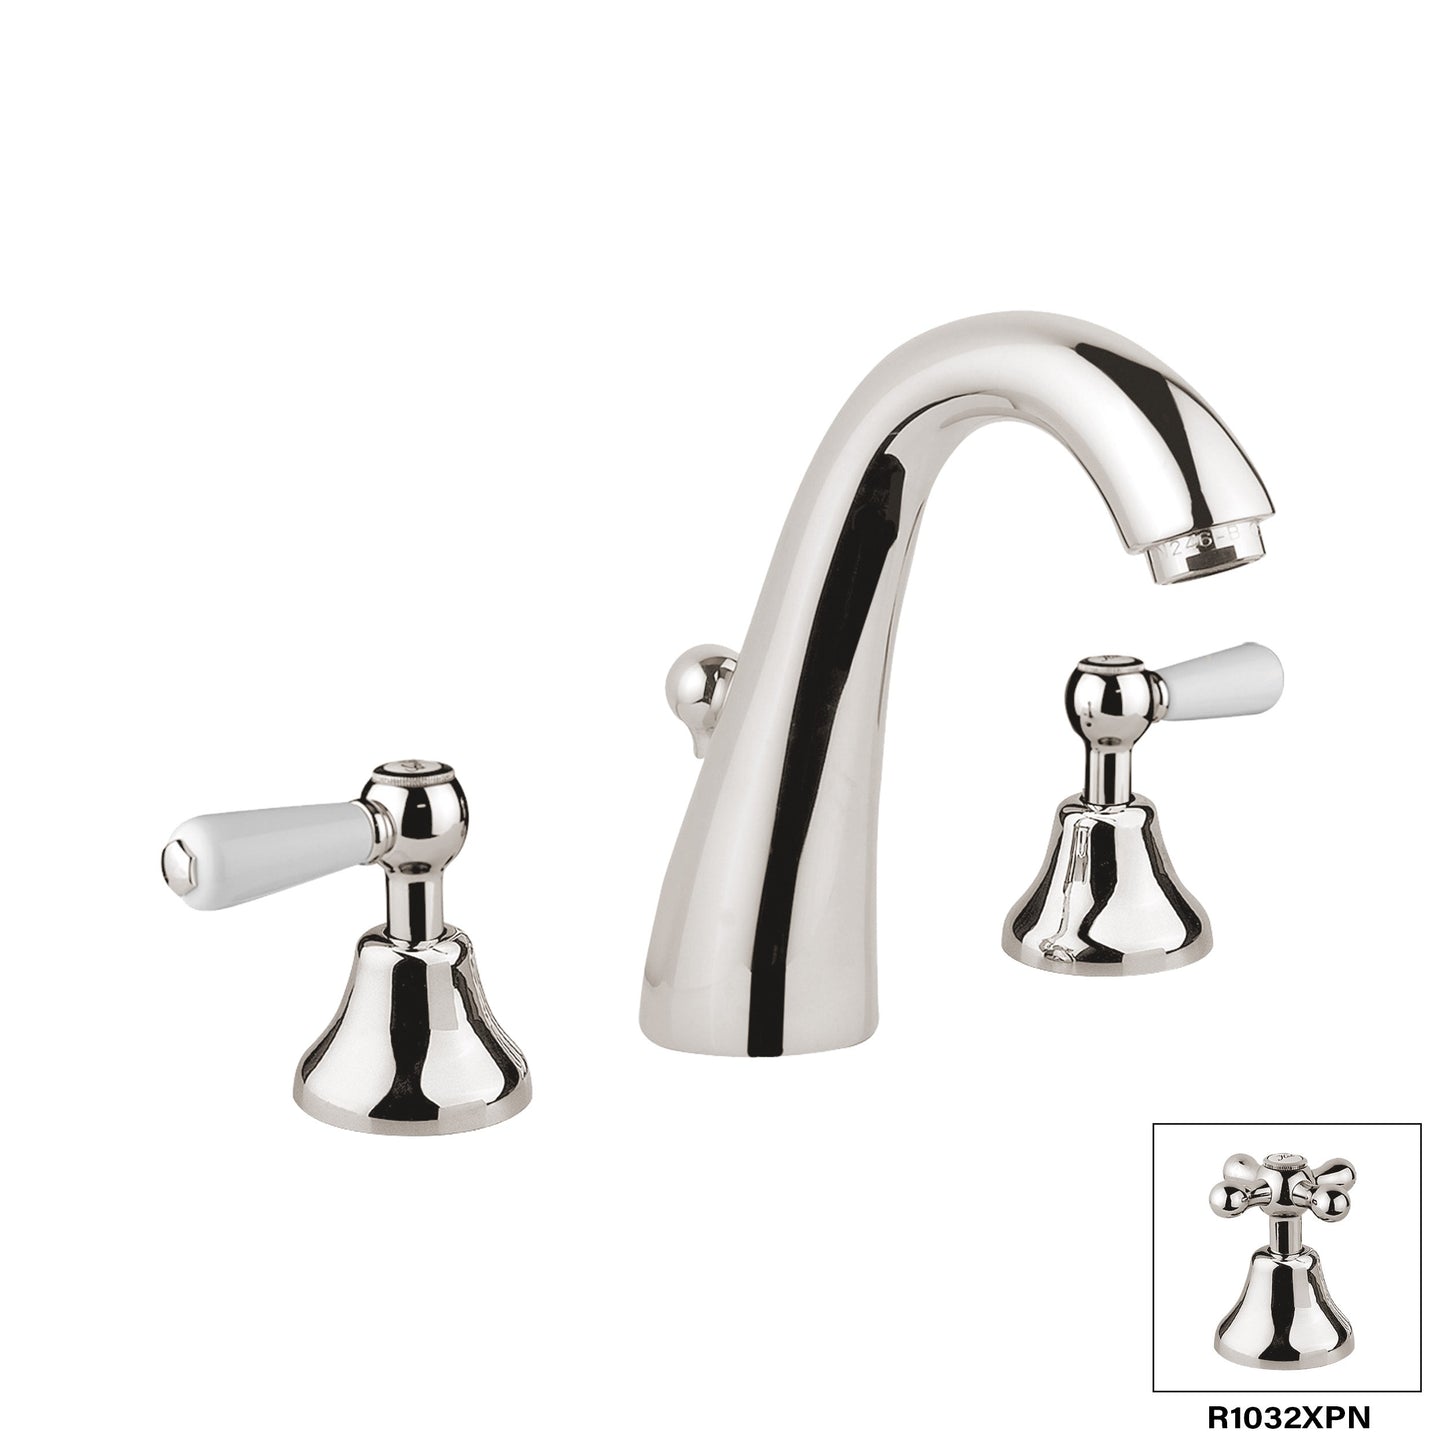 Aquadesign Products Widespread Lav – Drain Included (Colonial R1032L) - Polished Nickel